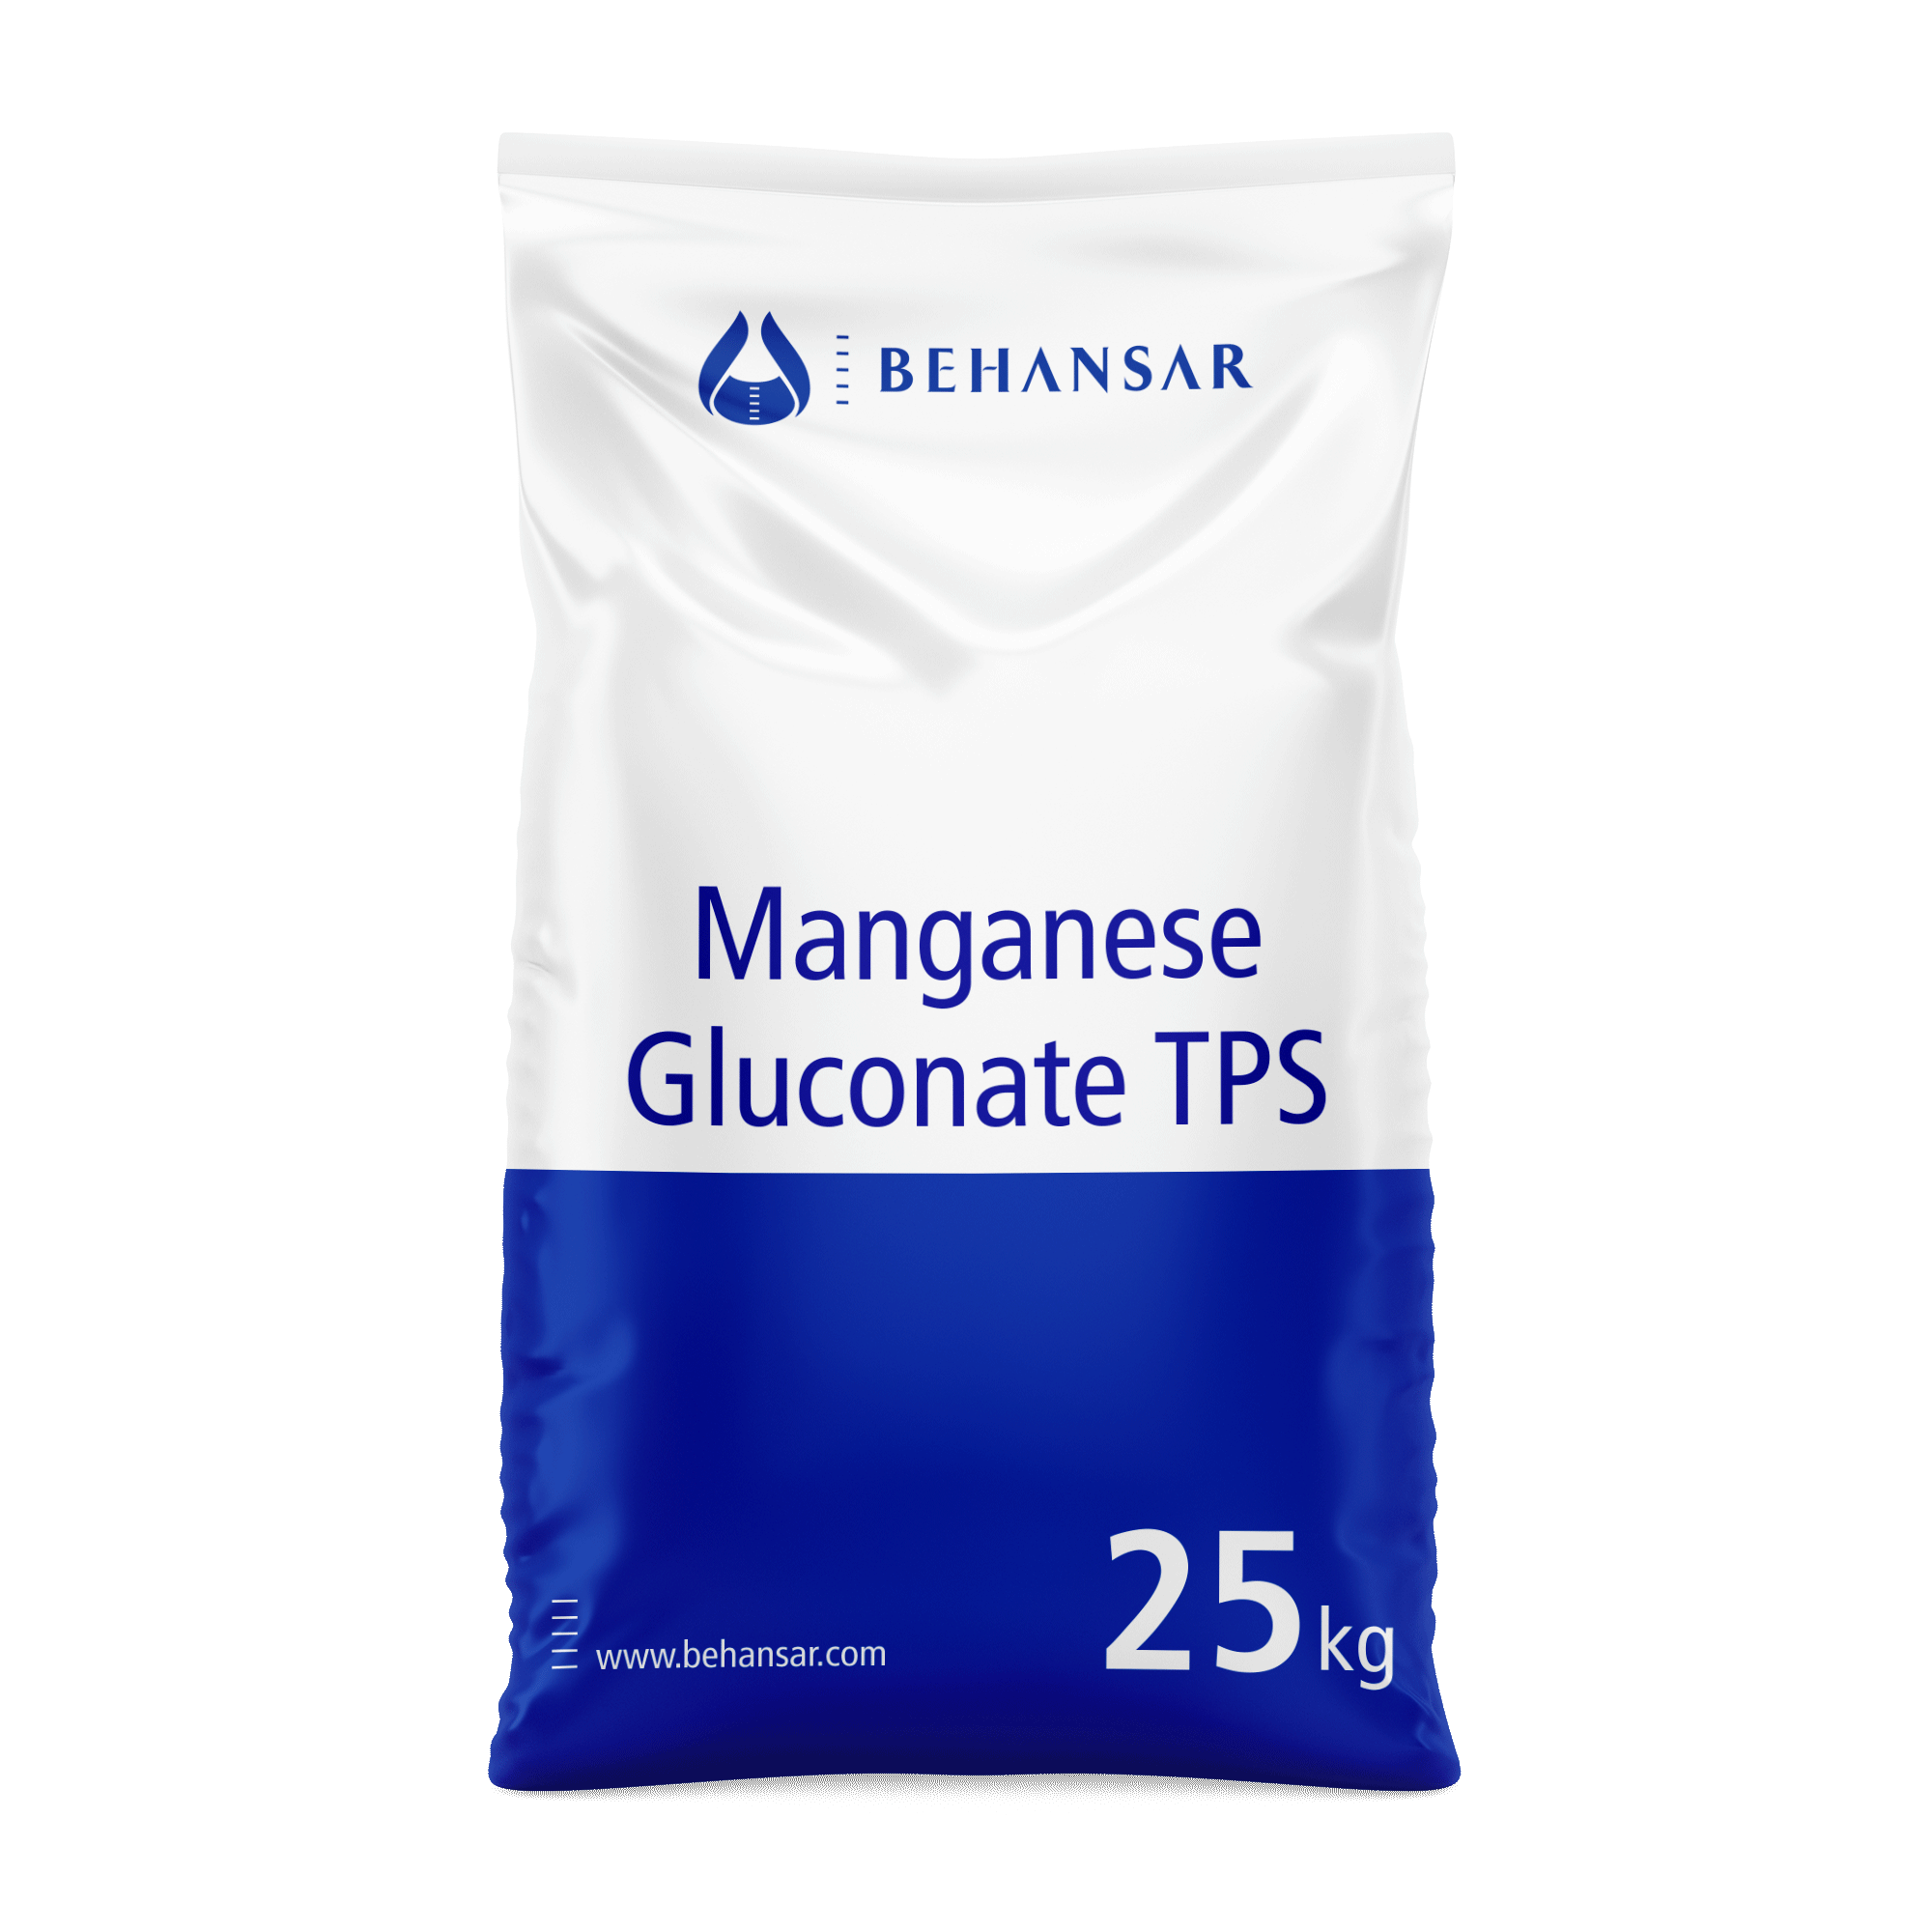 Manganese Gluconate TPS is one of the products of Behansar Co